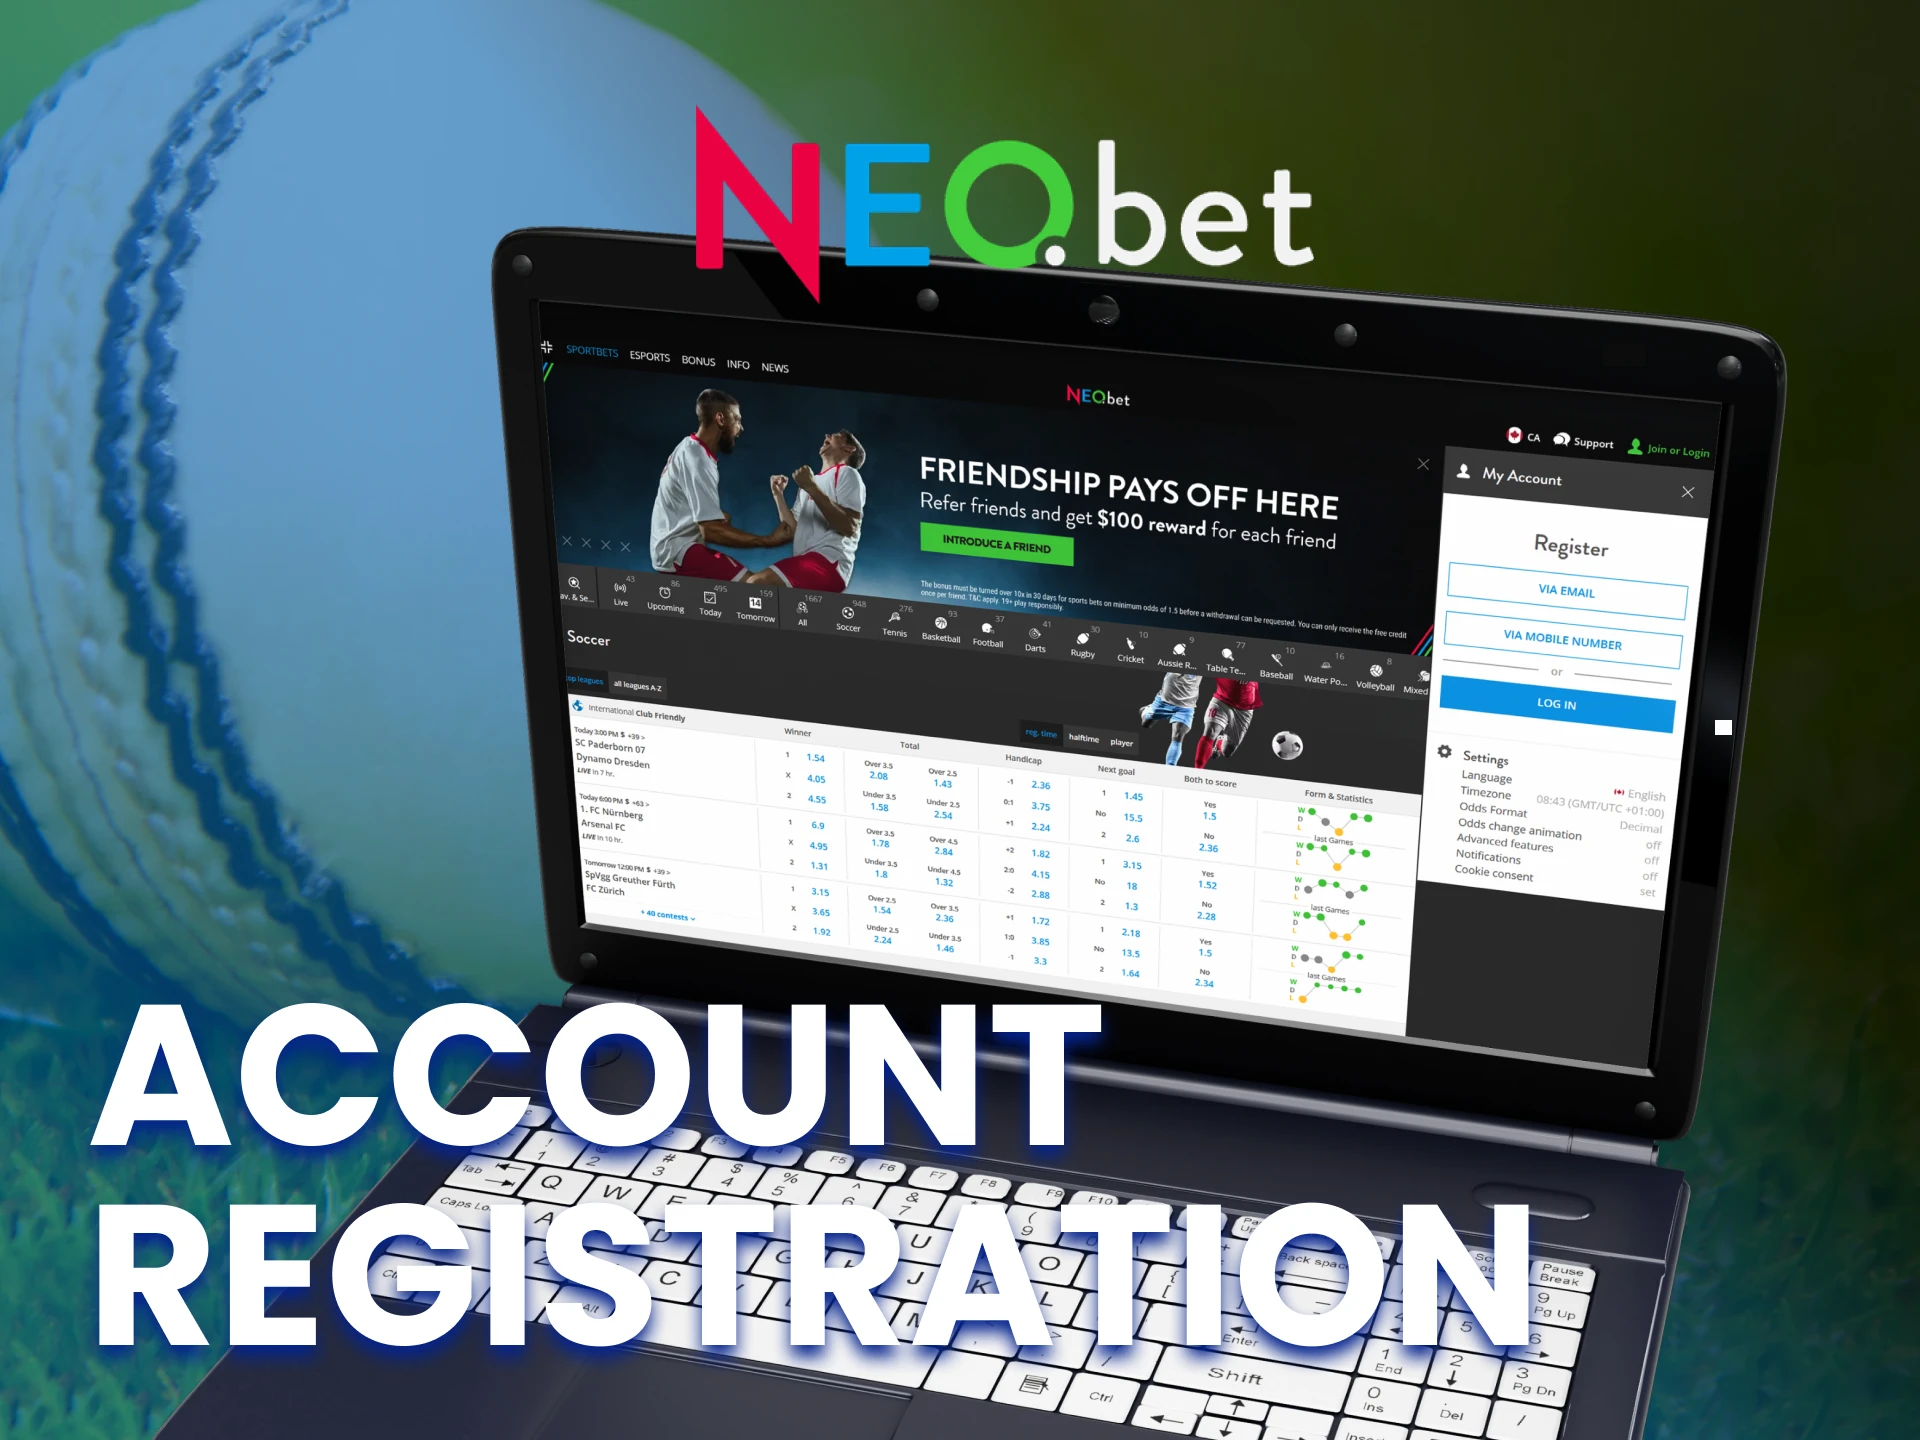 Complete a simple registration process at NEO.bet.